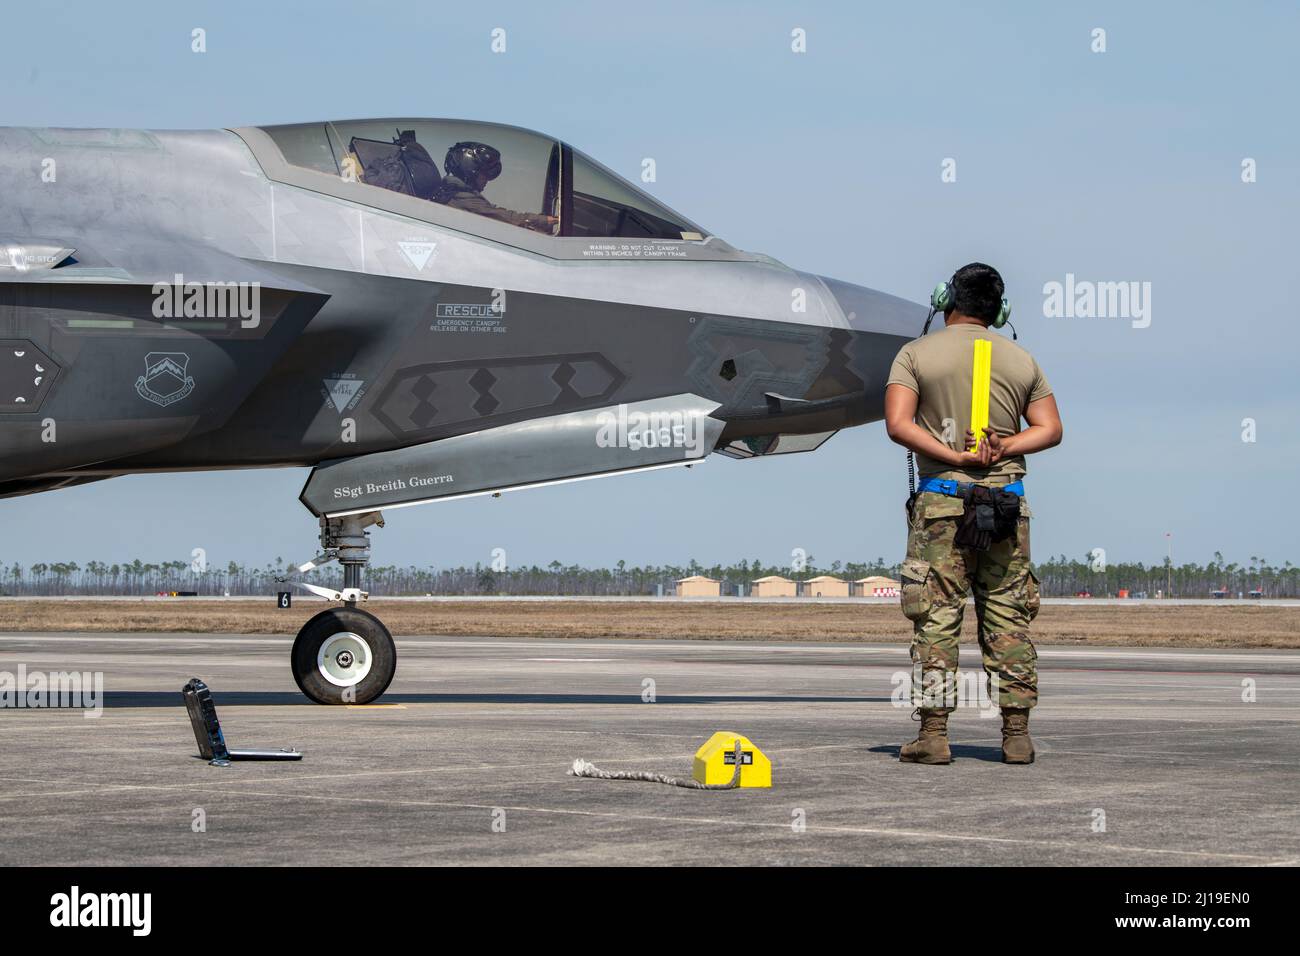 U.S. Air Force Senior Airman Abran Mondragon, 56th Aircraft Maintenance Squadron avionics systems technician, marshals Capt. Jack “Shotgun” Miller, 62nd Fighter Squadron F-35A instructor pilot, both assigned to Luke Air Force Base, Arizona, at Tyndall AFB, Florida, March 3, 2022. The 62nd FS spent approximately two weeks training out of Tyndall to complete part of their student pilot basic course syllabus. (U.S. Air Force photo by Staff Sgt. Betty R. Chevalier) Stock Photo